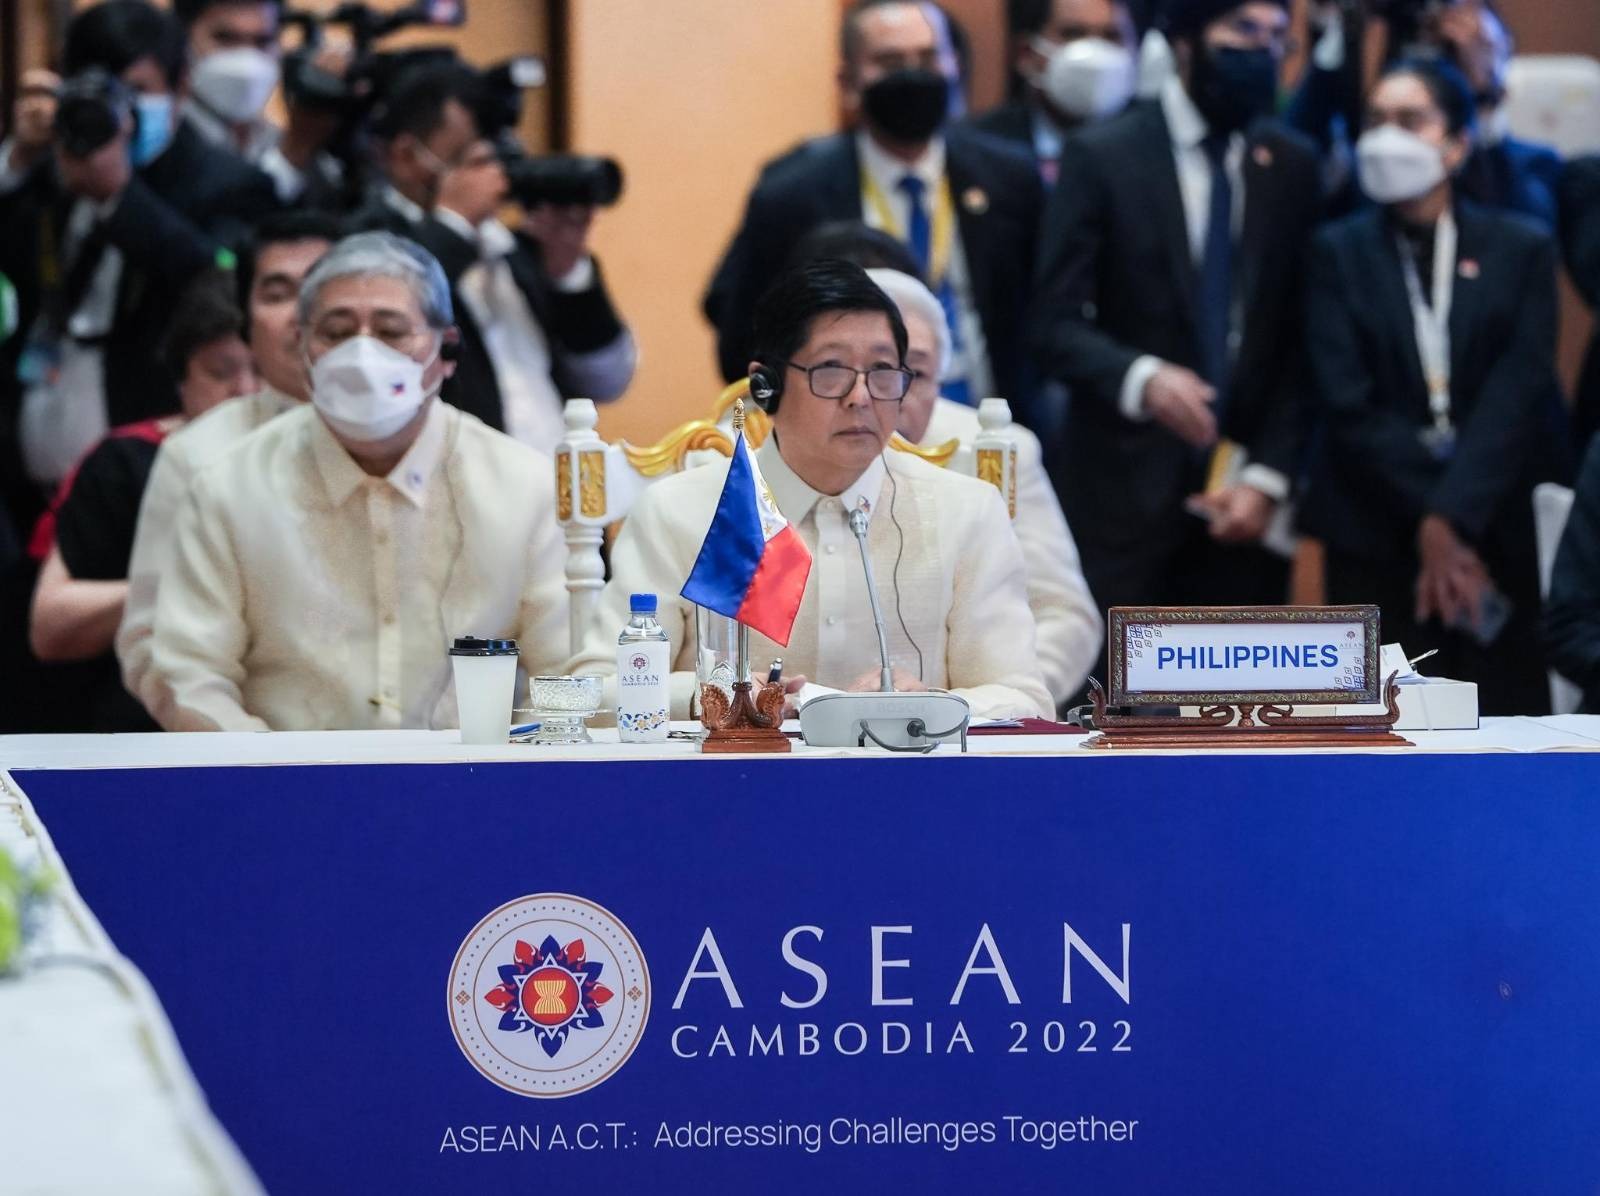 ‘Pharmacy of the world’: Marcos urges Asean to bolster ties with India for meds, jabs